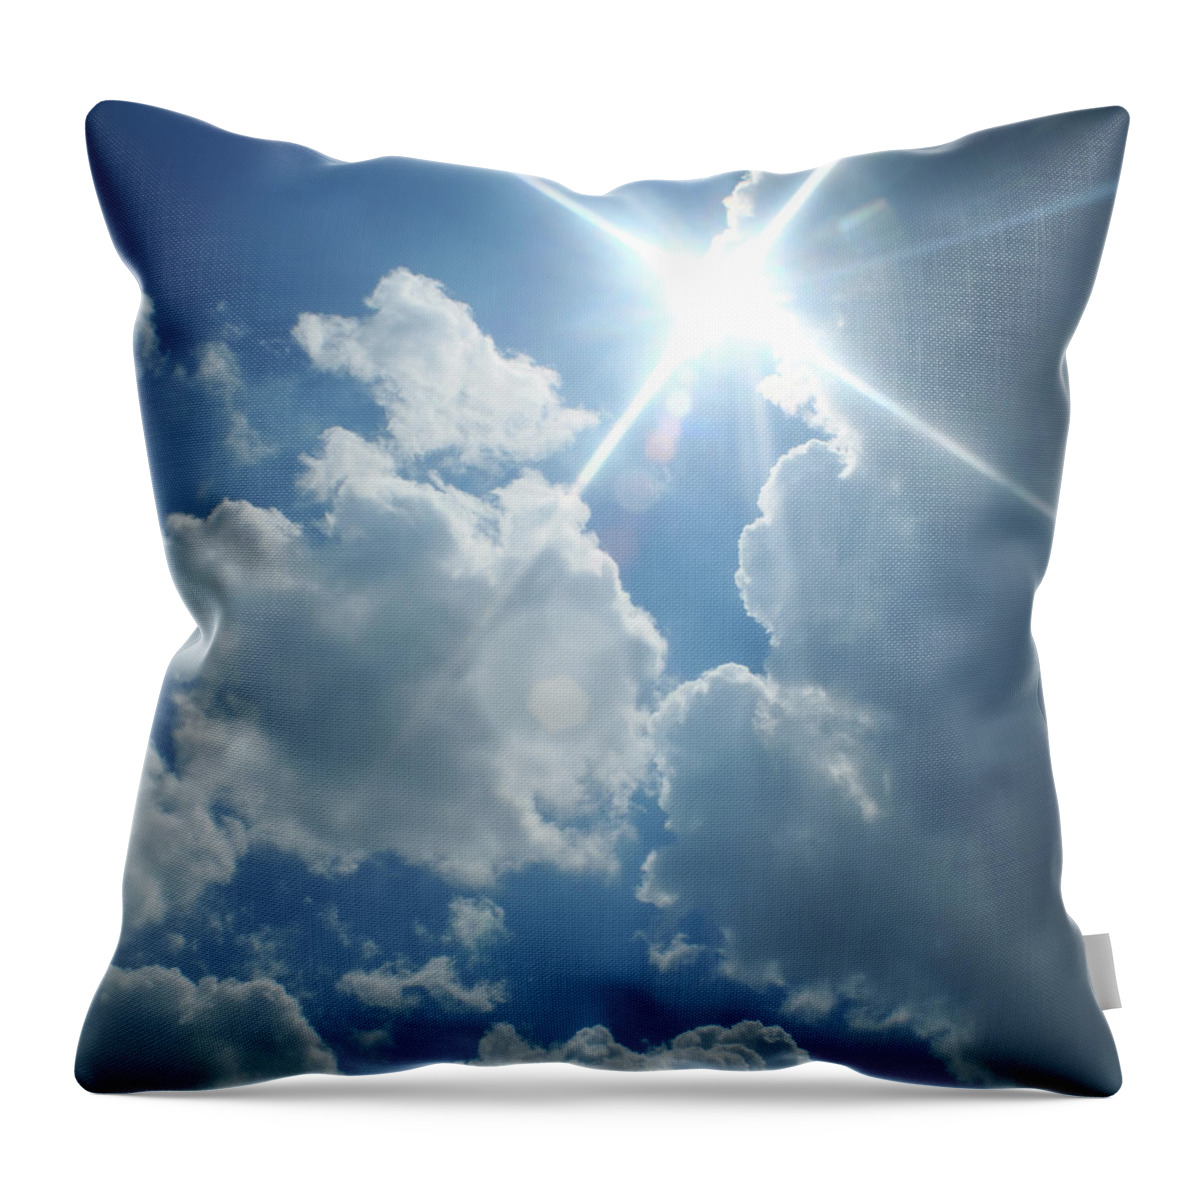 Environmental Conservation Throw Pillow featuring the photograph Sunny Cloudy Sky by Imagedepotpro